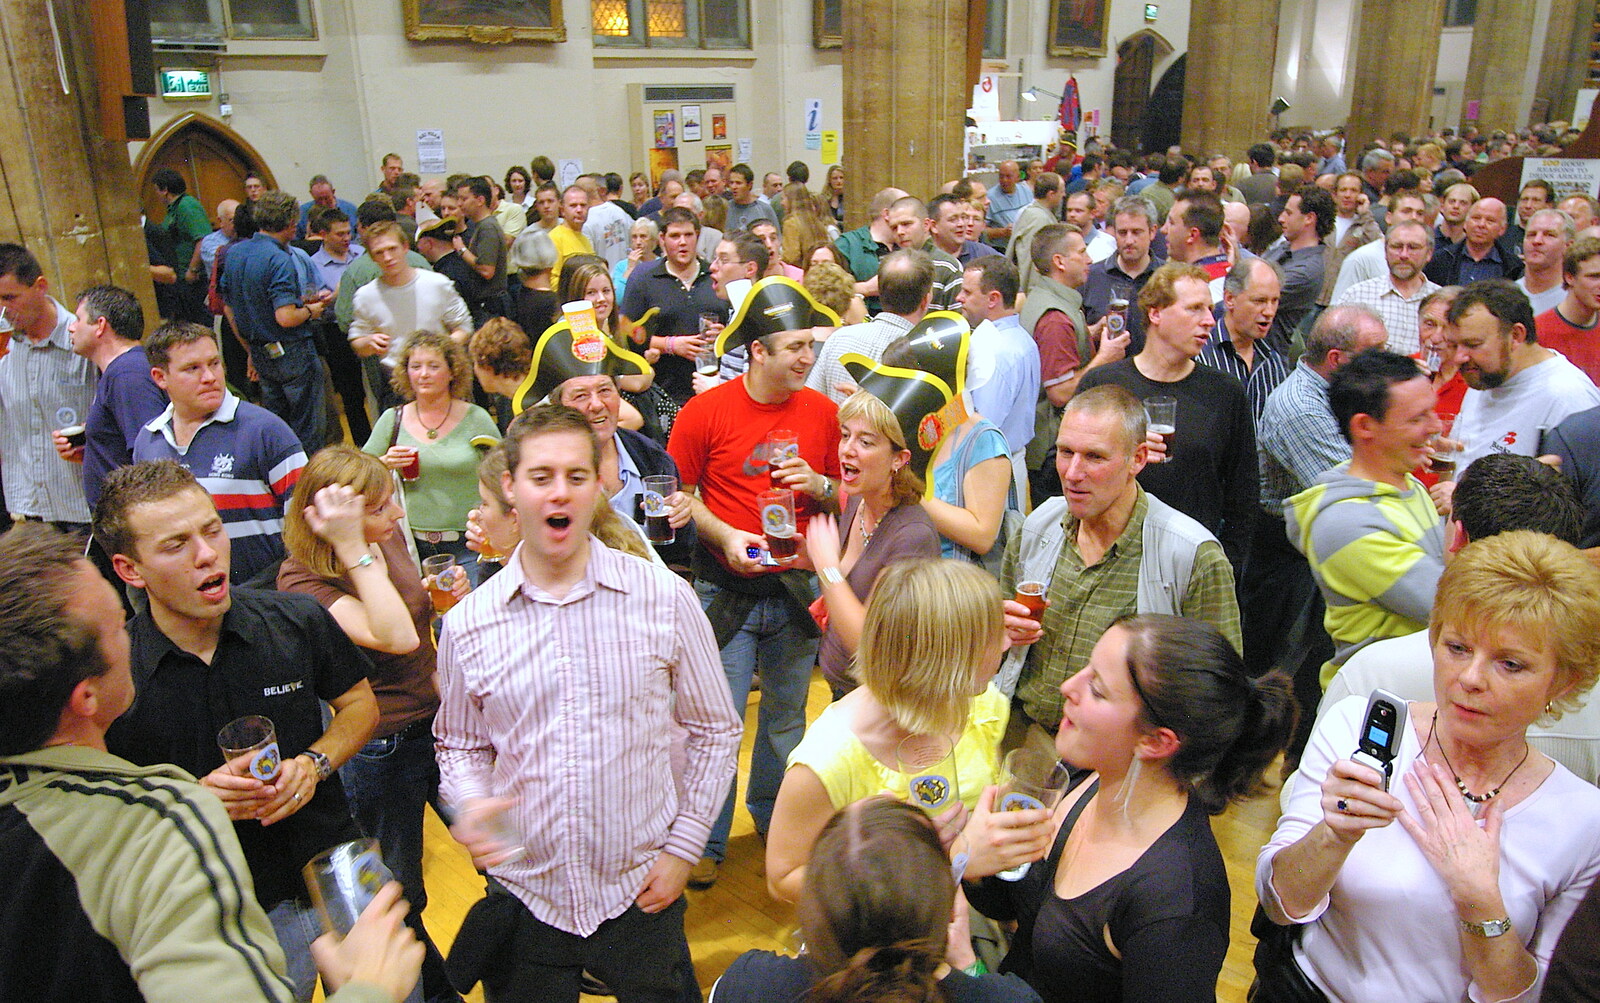 There's a load of singing going on from The 28th Norwich Beer Festival, St. Andrew's Hall, Norwich - 26th October 2005